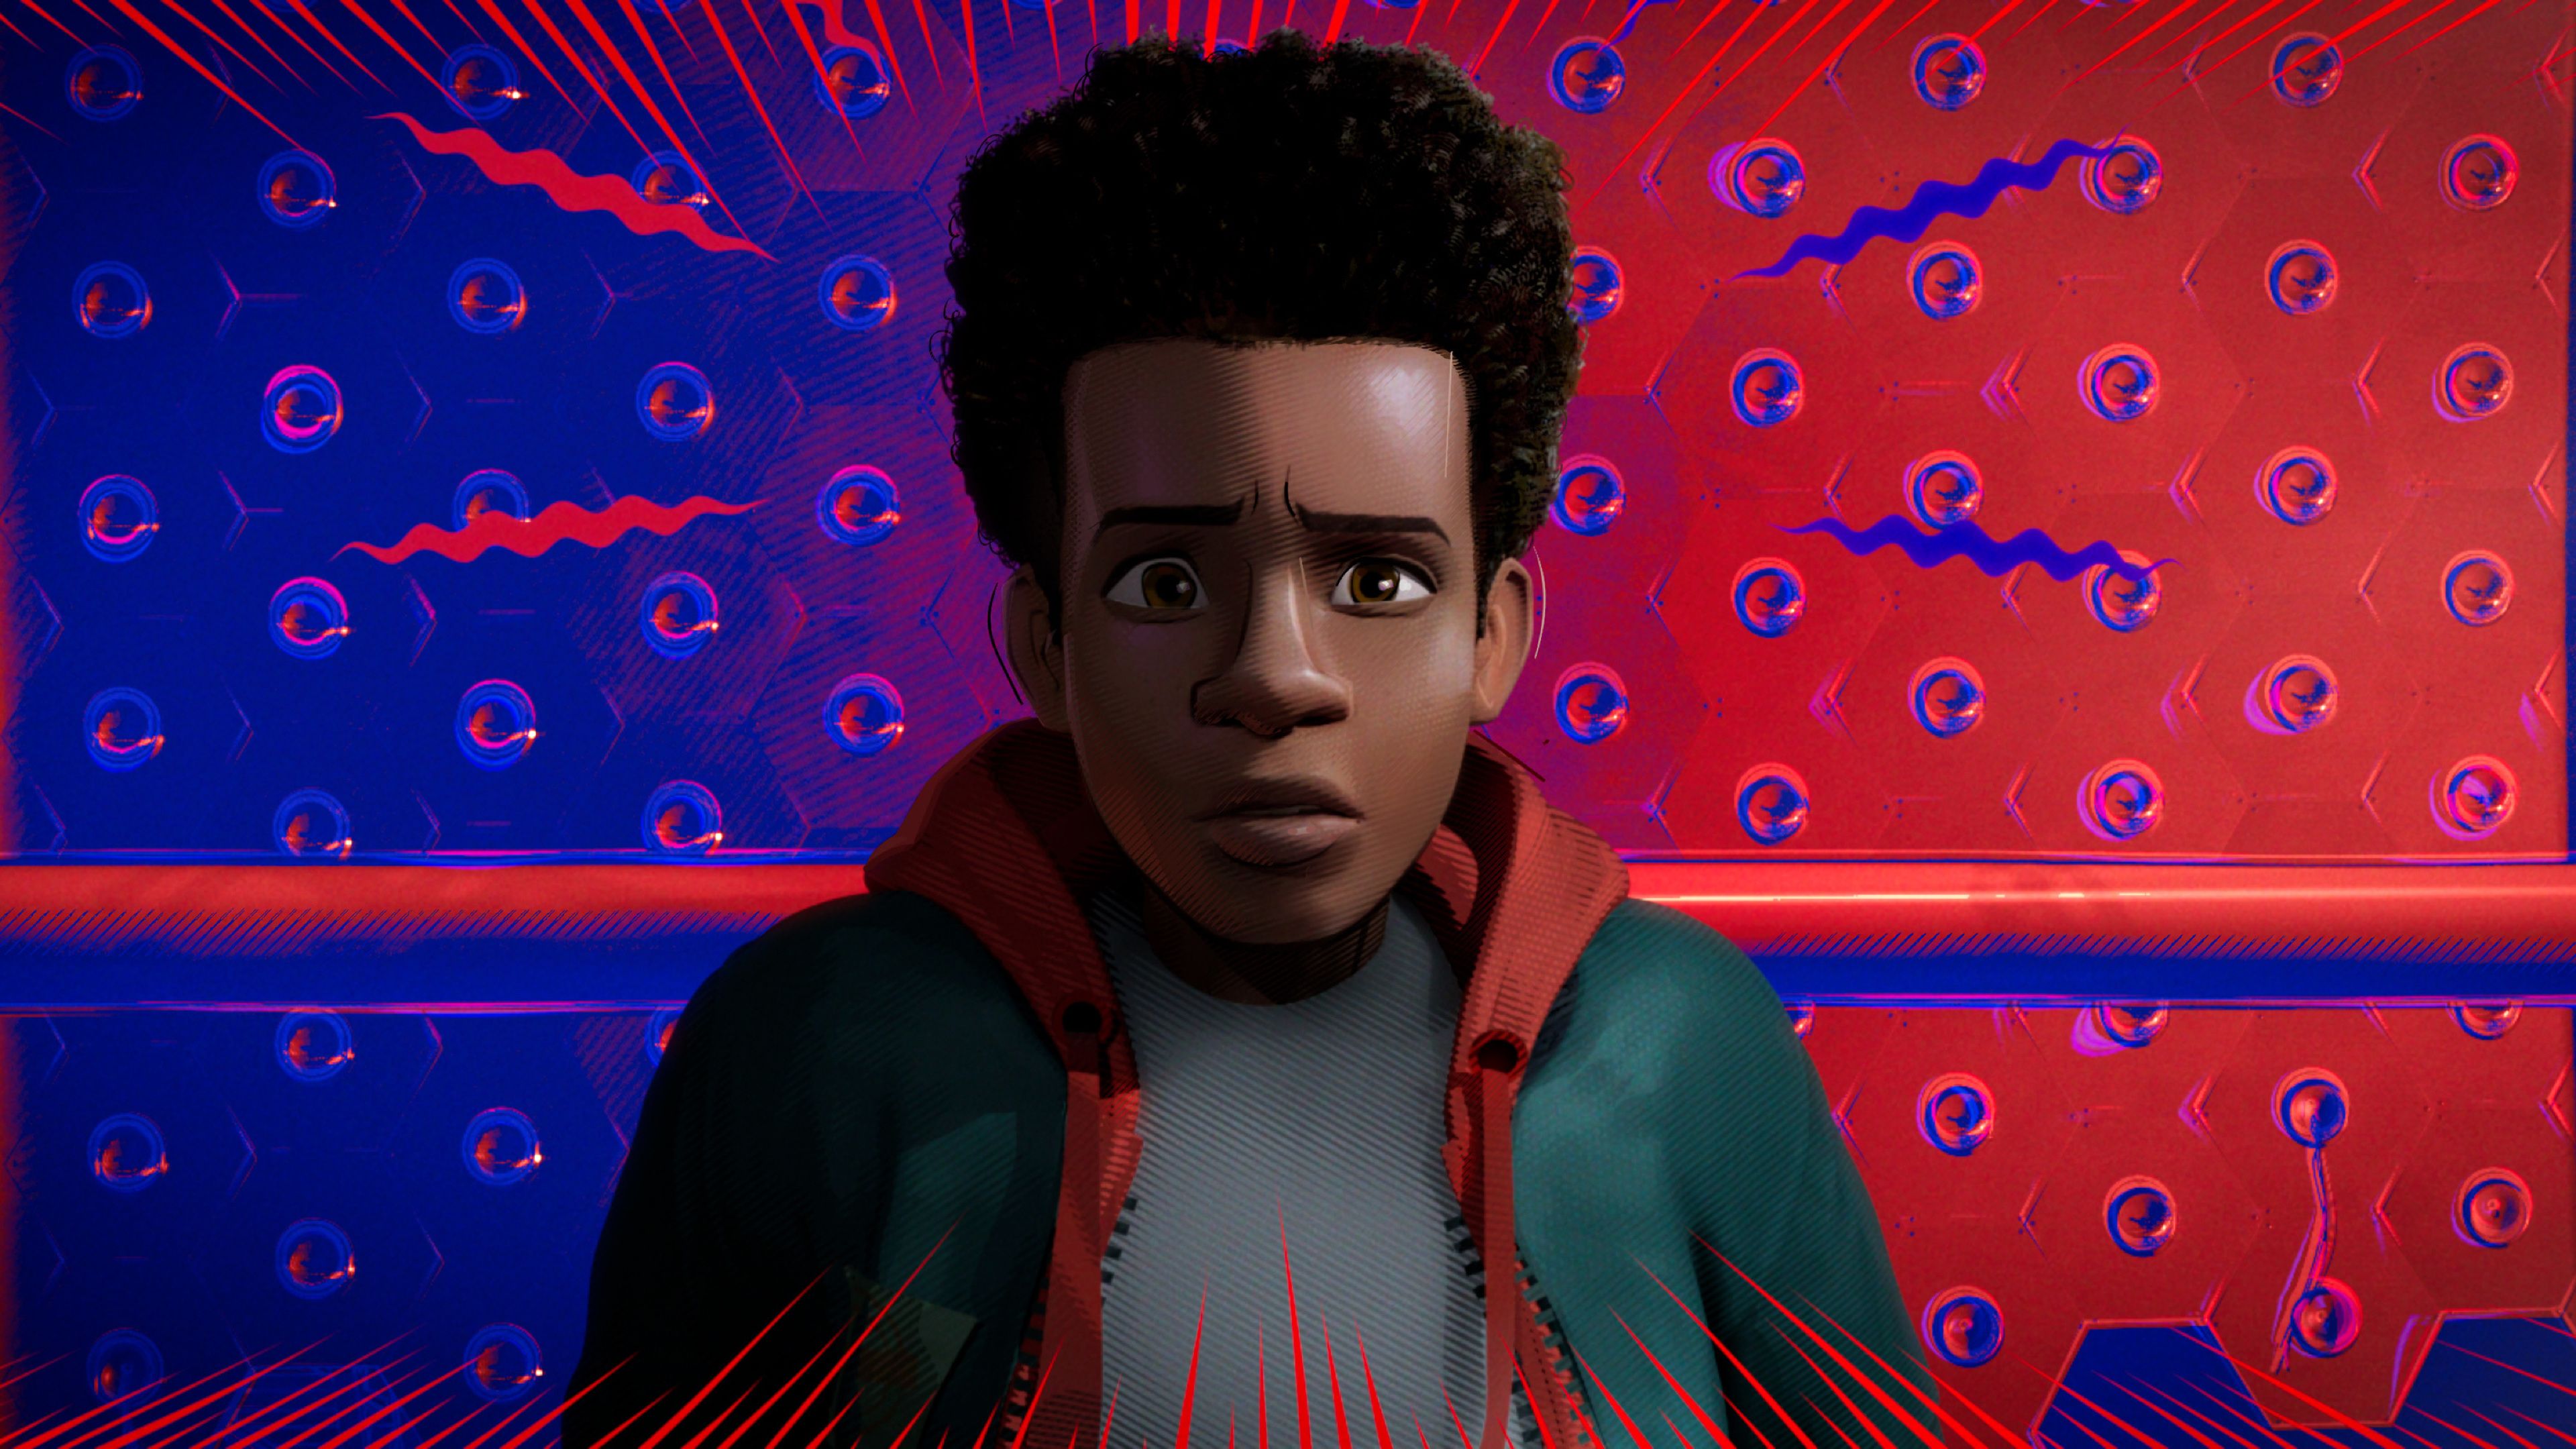 Miles Morales In Spider Man Into The Spider Verse 4K Wallpaper, HD Movies 4K Wallpaper, Image, Photo and Background